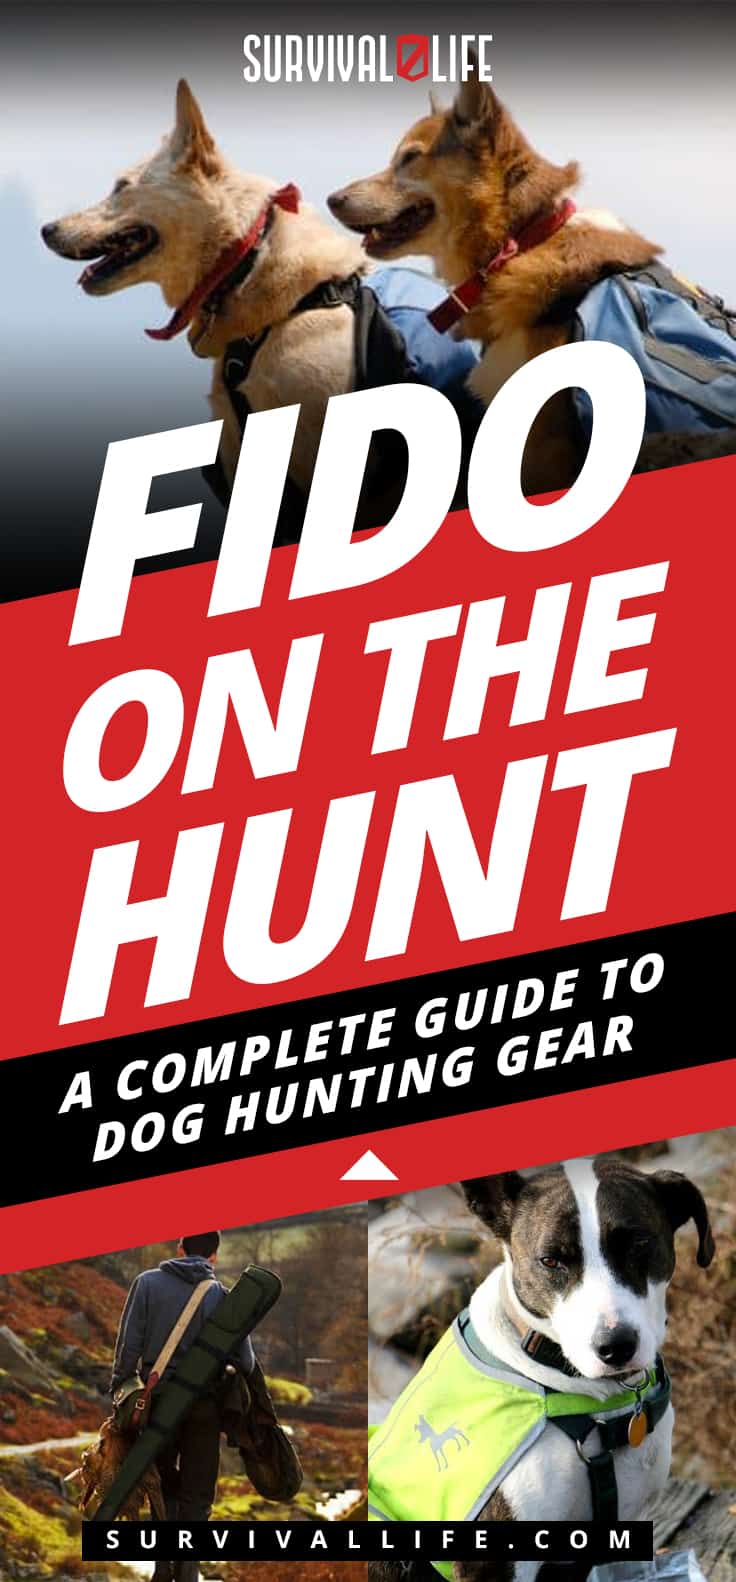 Fido On The Hunt: A Complete Guide To Dog Hunting Gear | https://survivallife.com/fido-on-the-hunt-a-complete-guide-to-dog-hunting-gear/